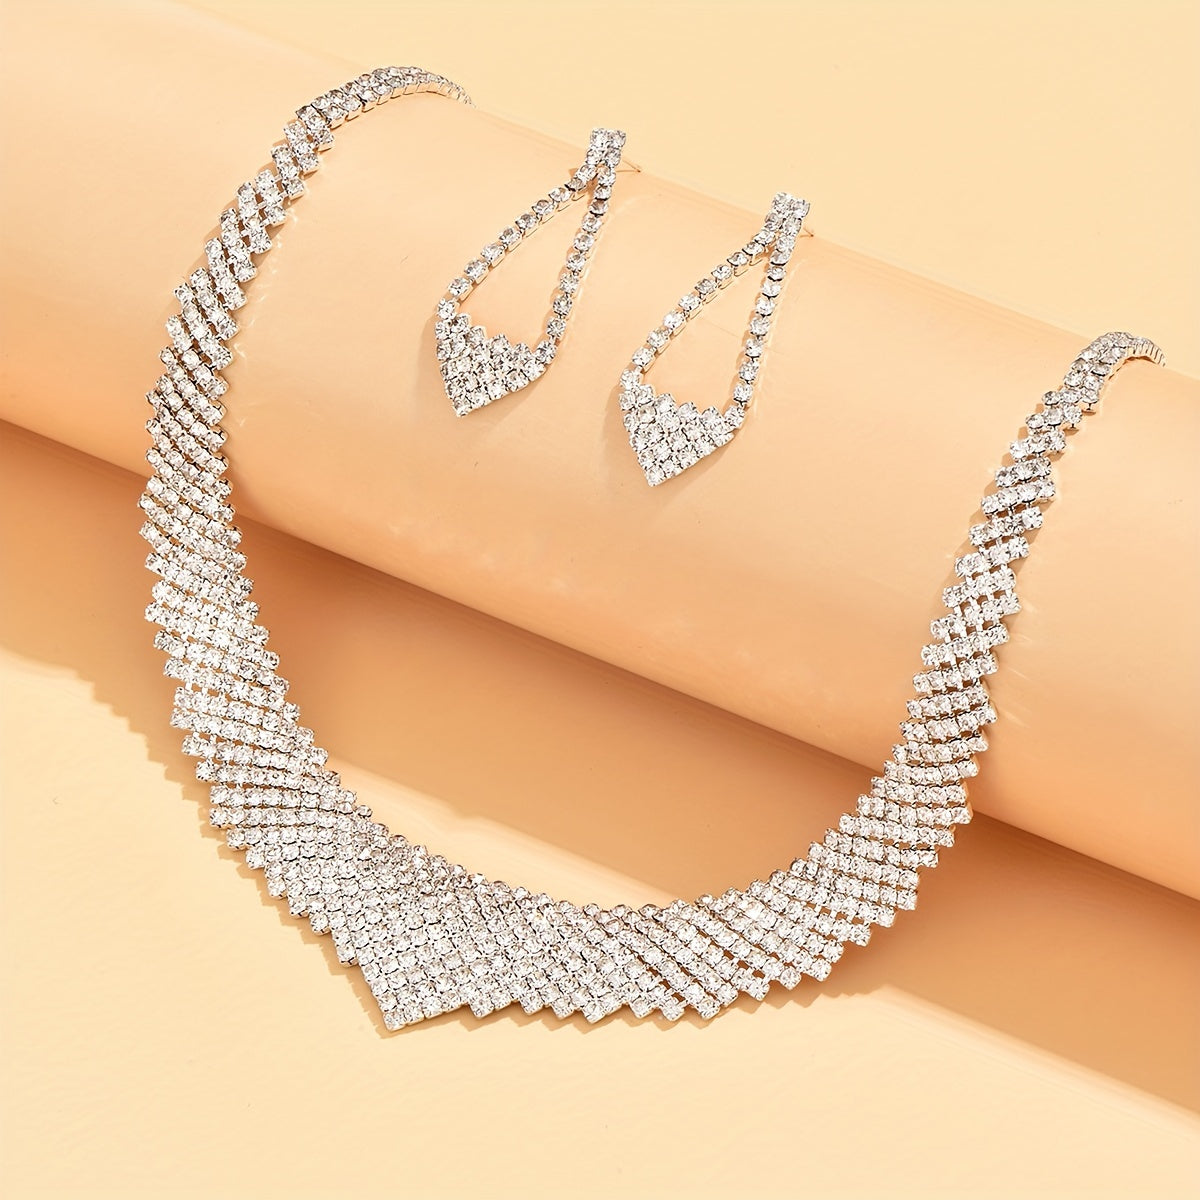 Elegant Rhinestone Necklace and Earrings Set for Women - Perfect for Dressy and Casual Occasions